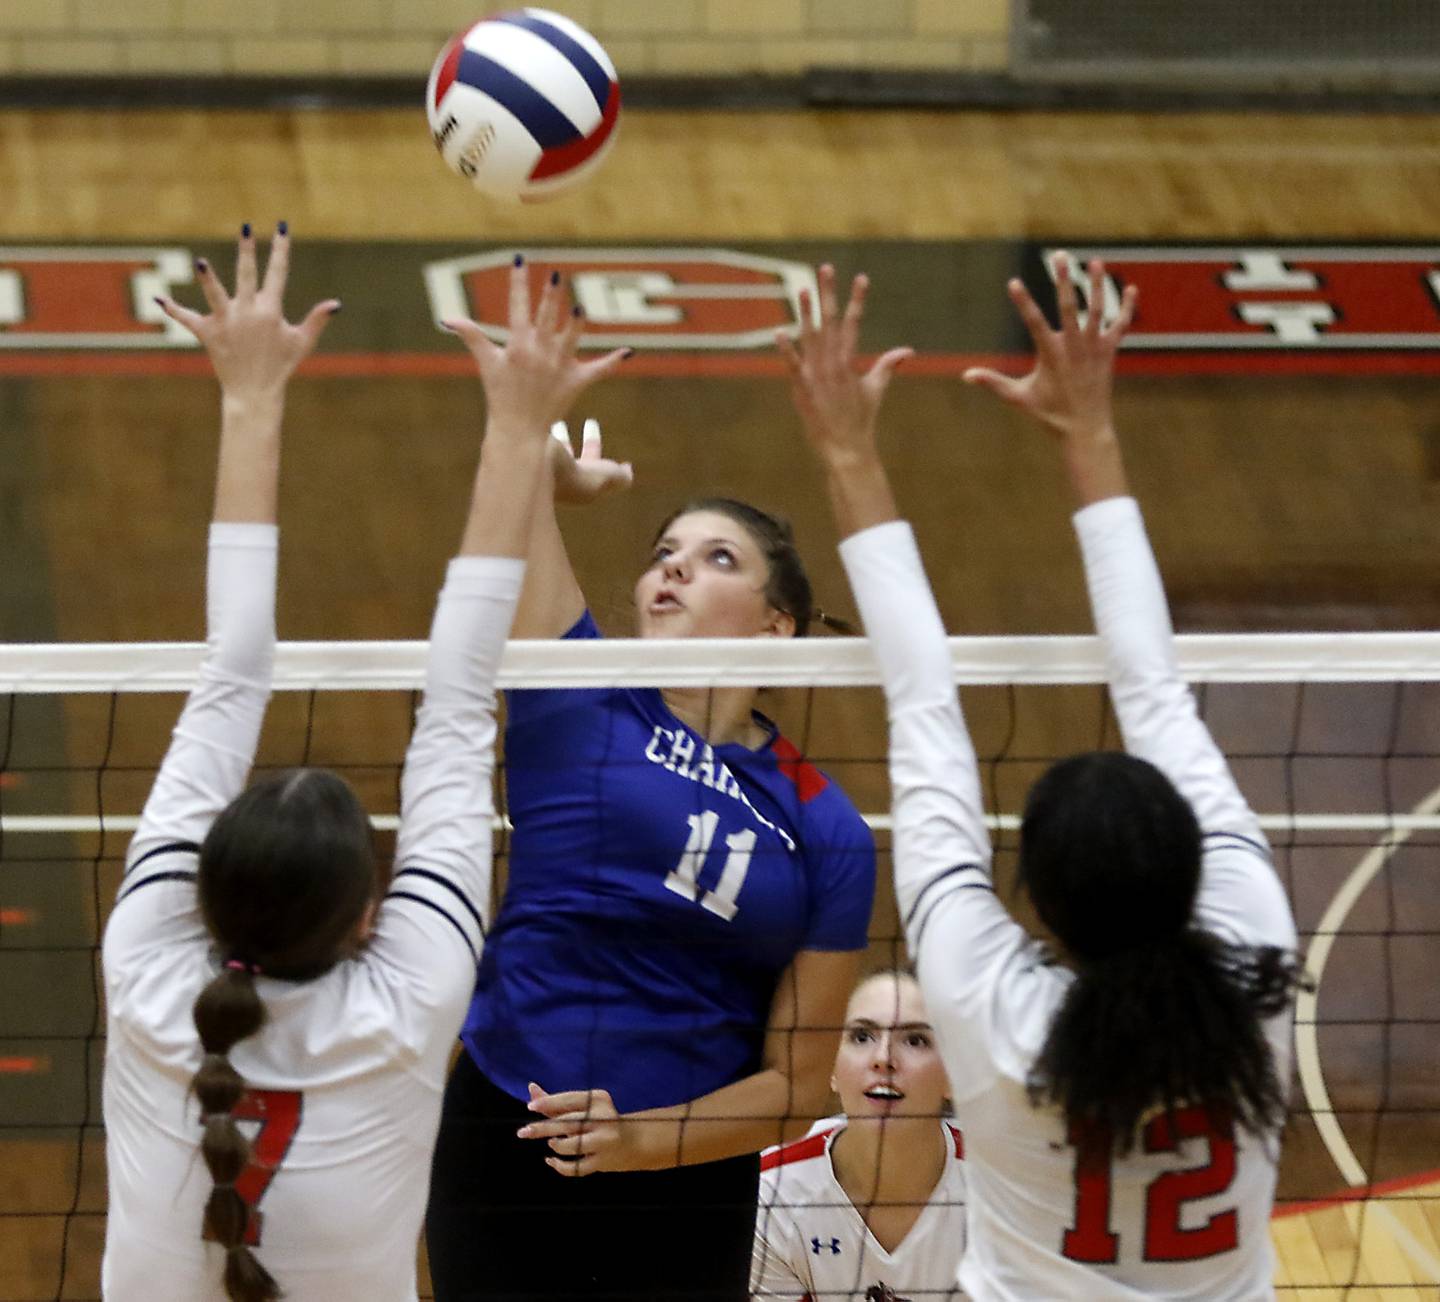 Dundee-Crown's Taylor Findlay tries to hit the ball through the block of Huntley's Jocelyn Erling (left) and Morgan Jones during the IHSA Class 4A Rockford East Regional Volleyball Championship match on Thursday, Oct. 26, 2023, at Rockford East High School.